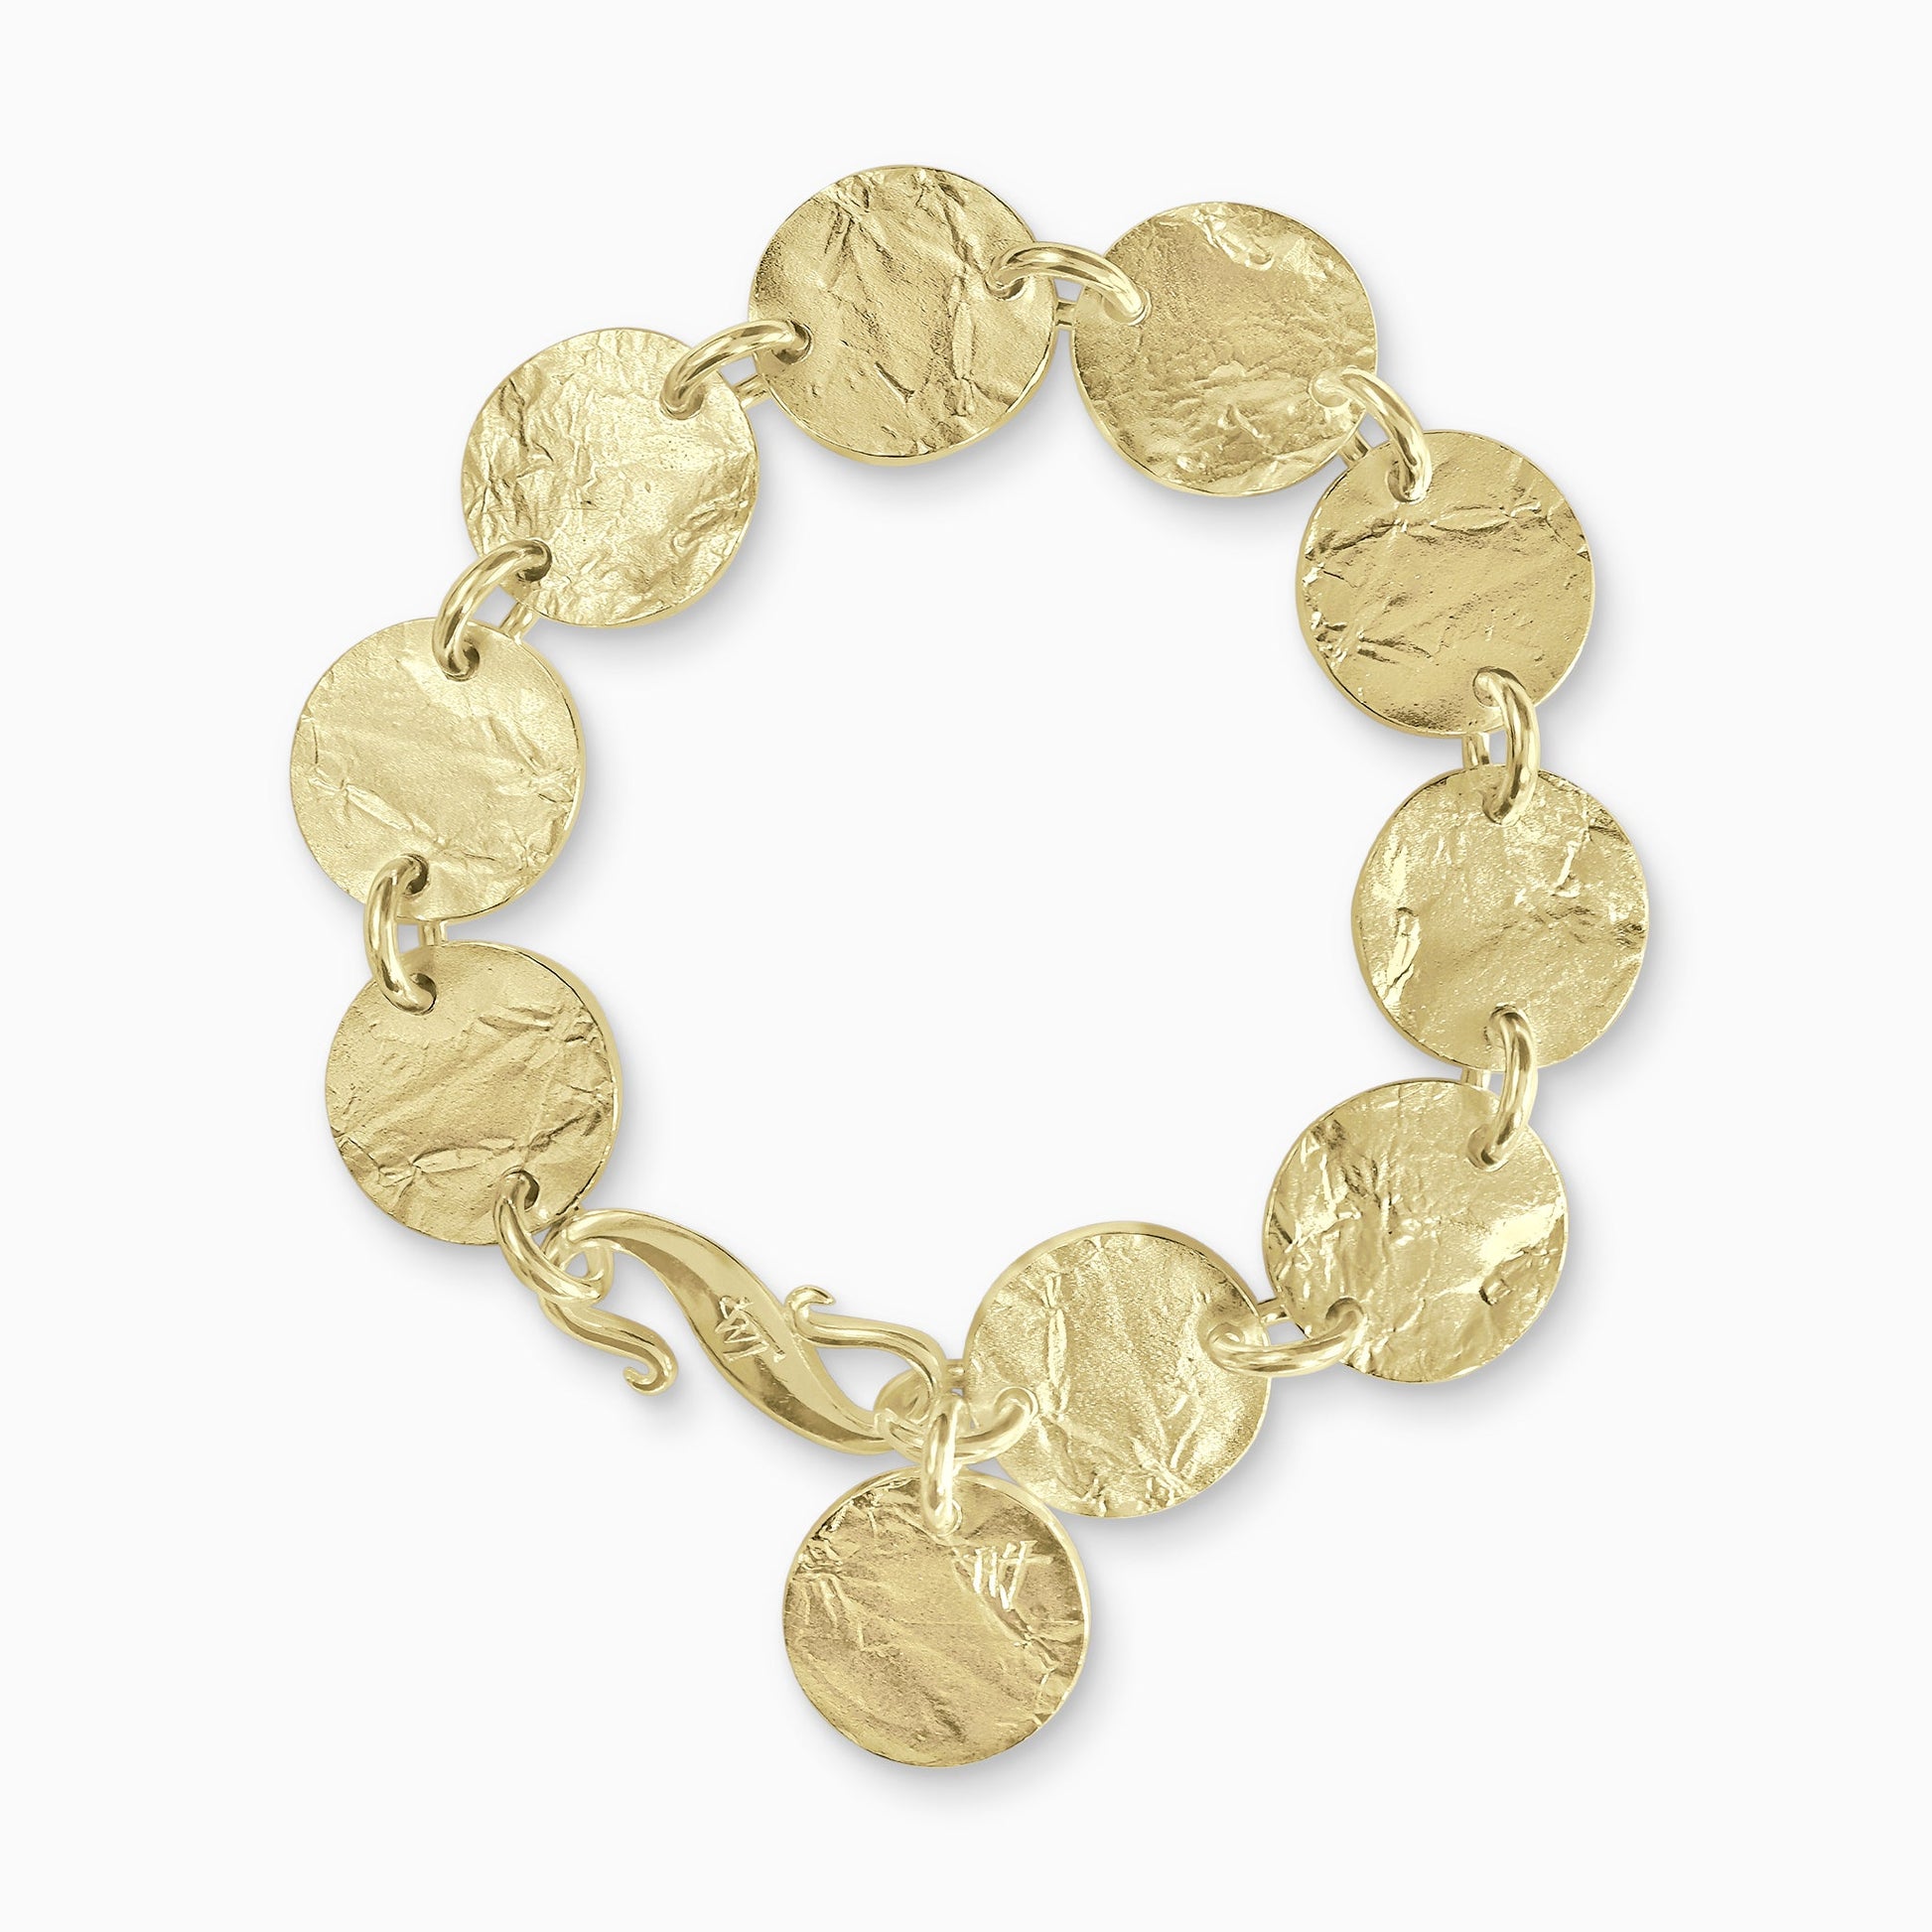 An 18ct Fairtrade yellow gold bracelet of 9 linked textured discs with a 10th suspended near the large ’S’ clasp. Discs 17mm diameter. Bracelet length 190mm.